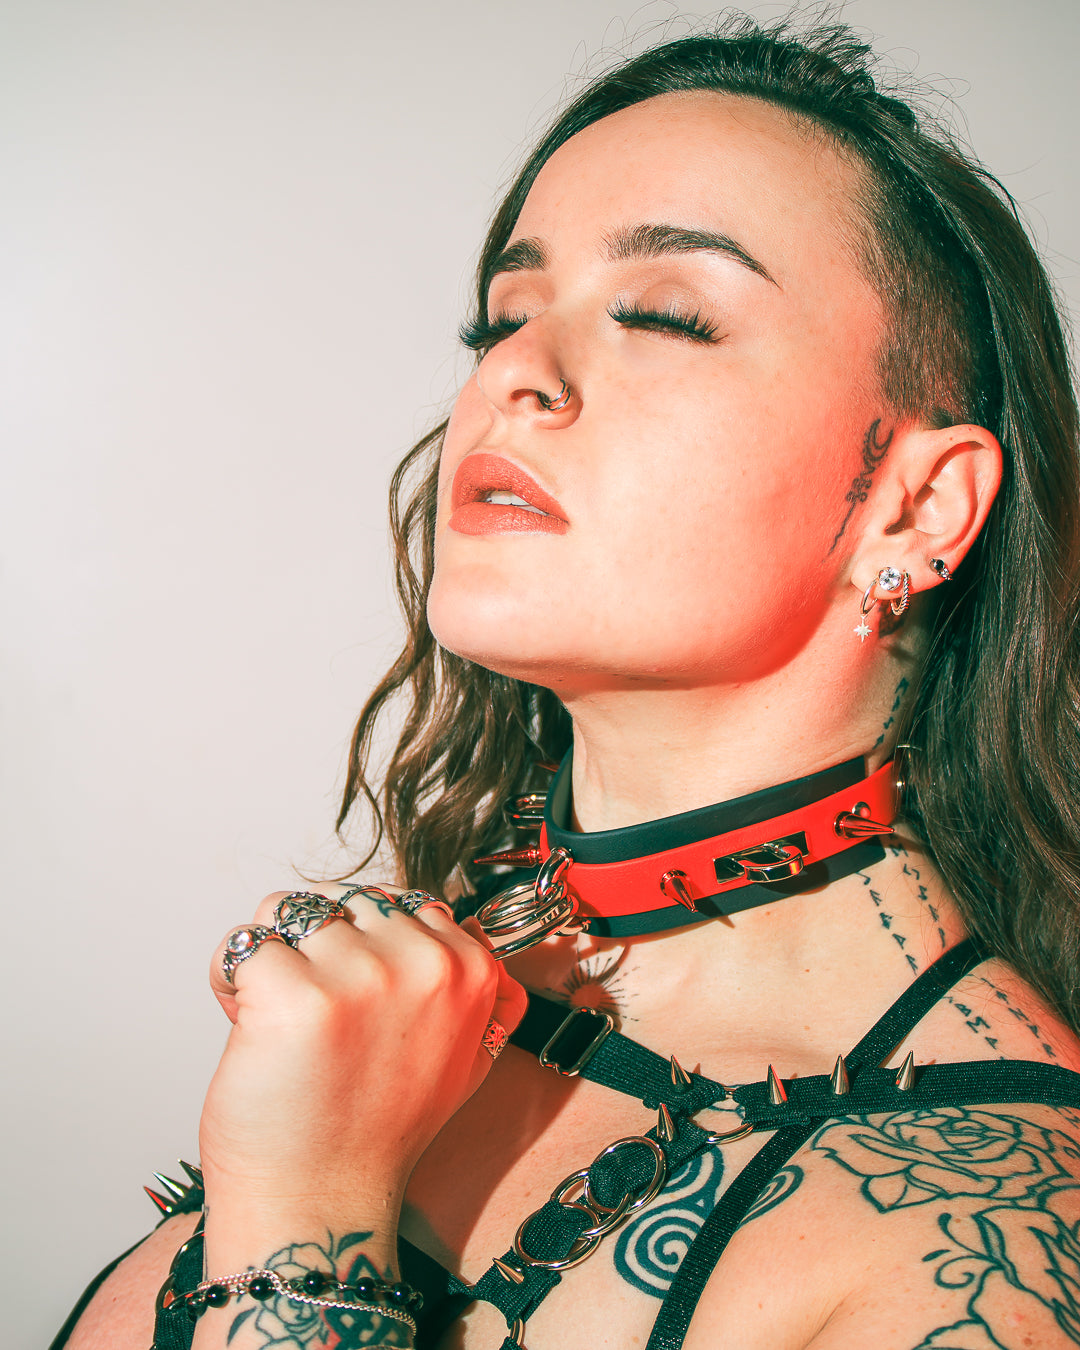 Limited Edition Red Spikes Saturn biothane or leather collar